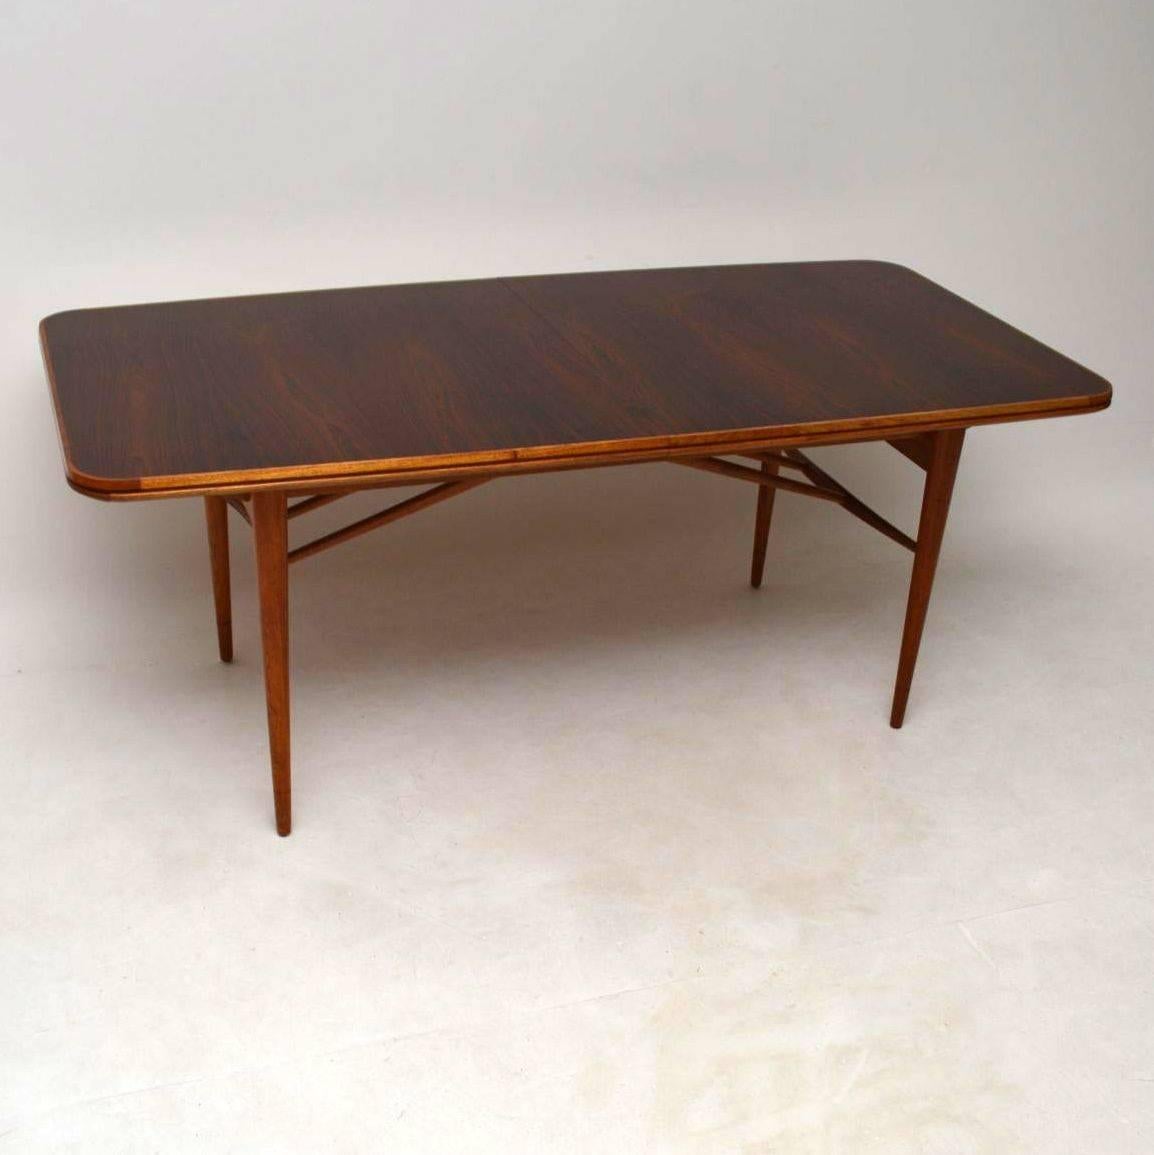 A beautifully made and extremely stylish vintage dining table, this was designed by Robert Heritage and was made by Archie Shine in London during the 1960s. The quality is fantastic, this has stunning wood grain patterns on the top, the base is